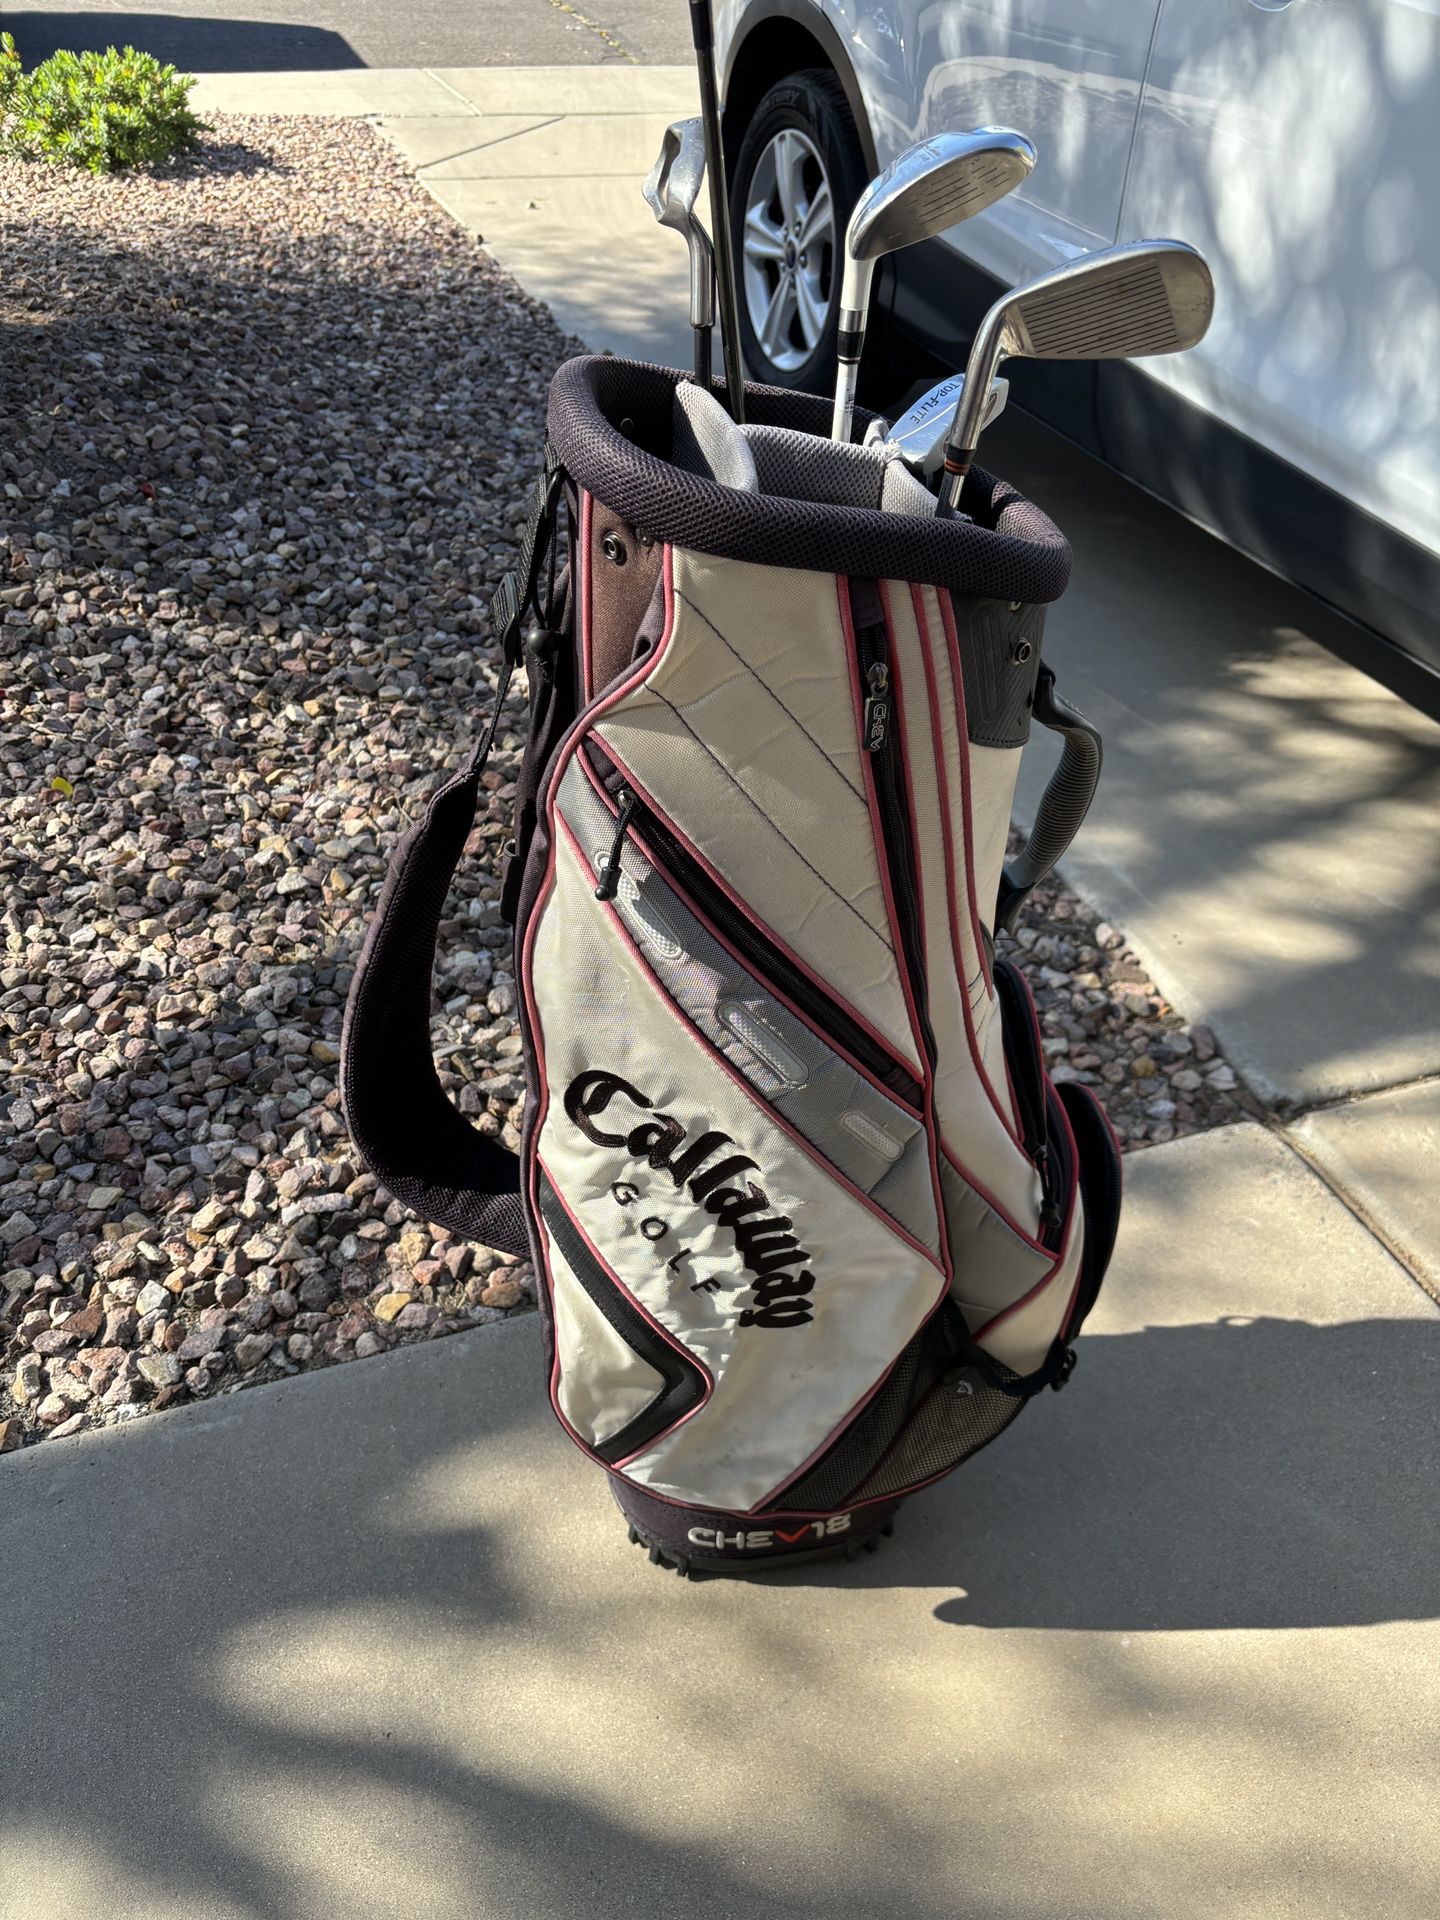 Golf Bag With Clubs 